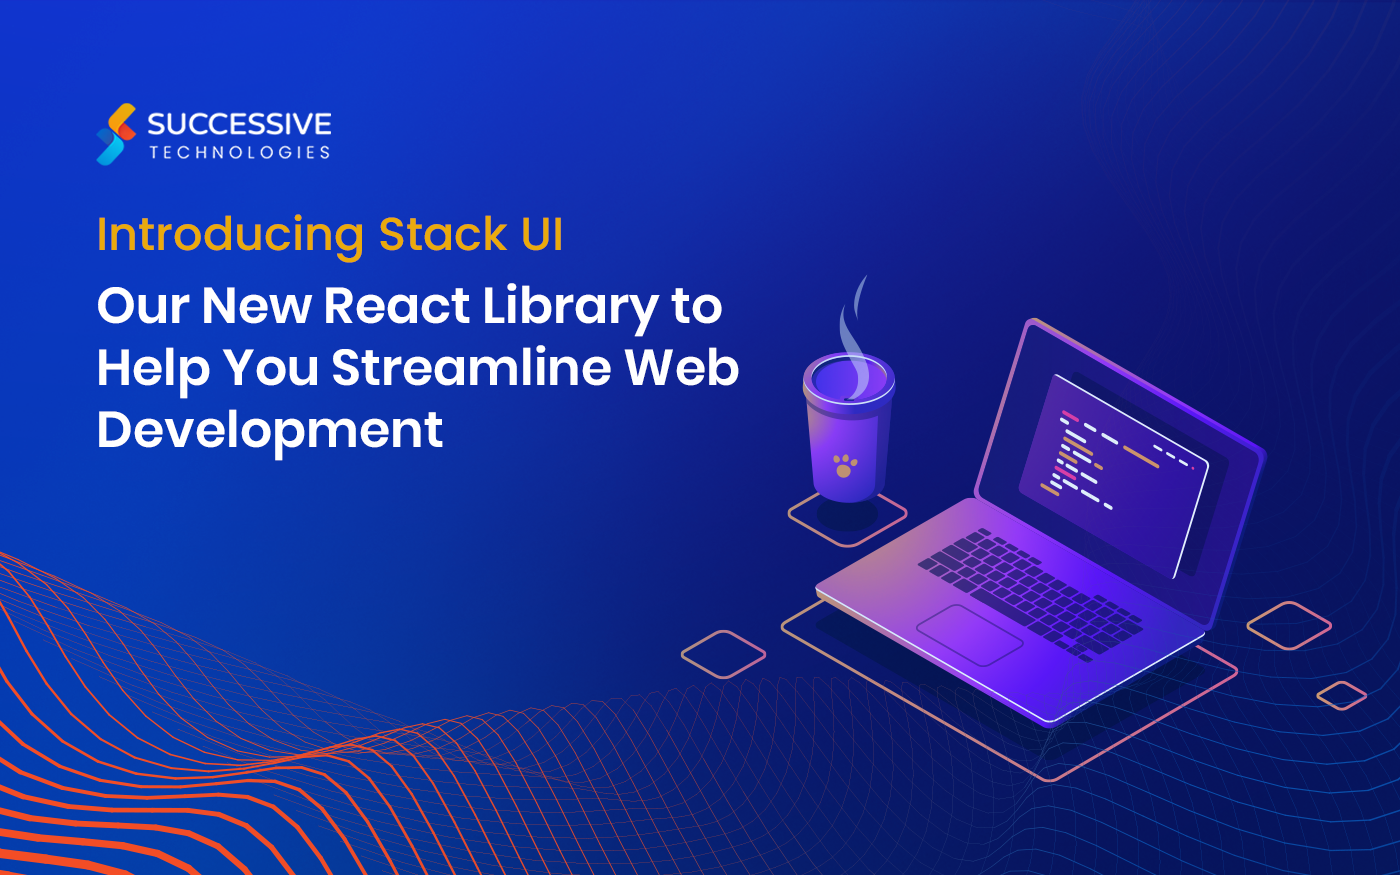 Introducing Stack UI: Our New React Library to Help You Streamline Web Development